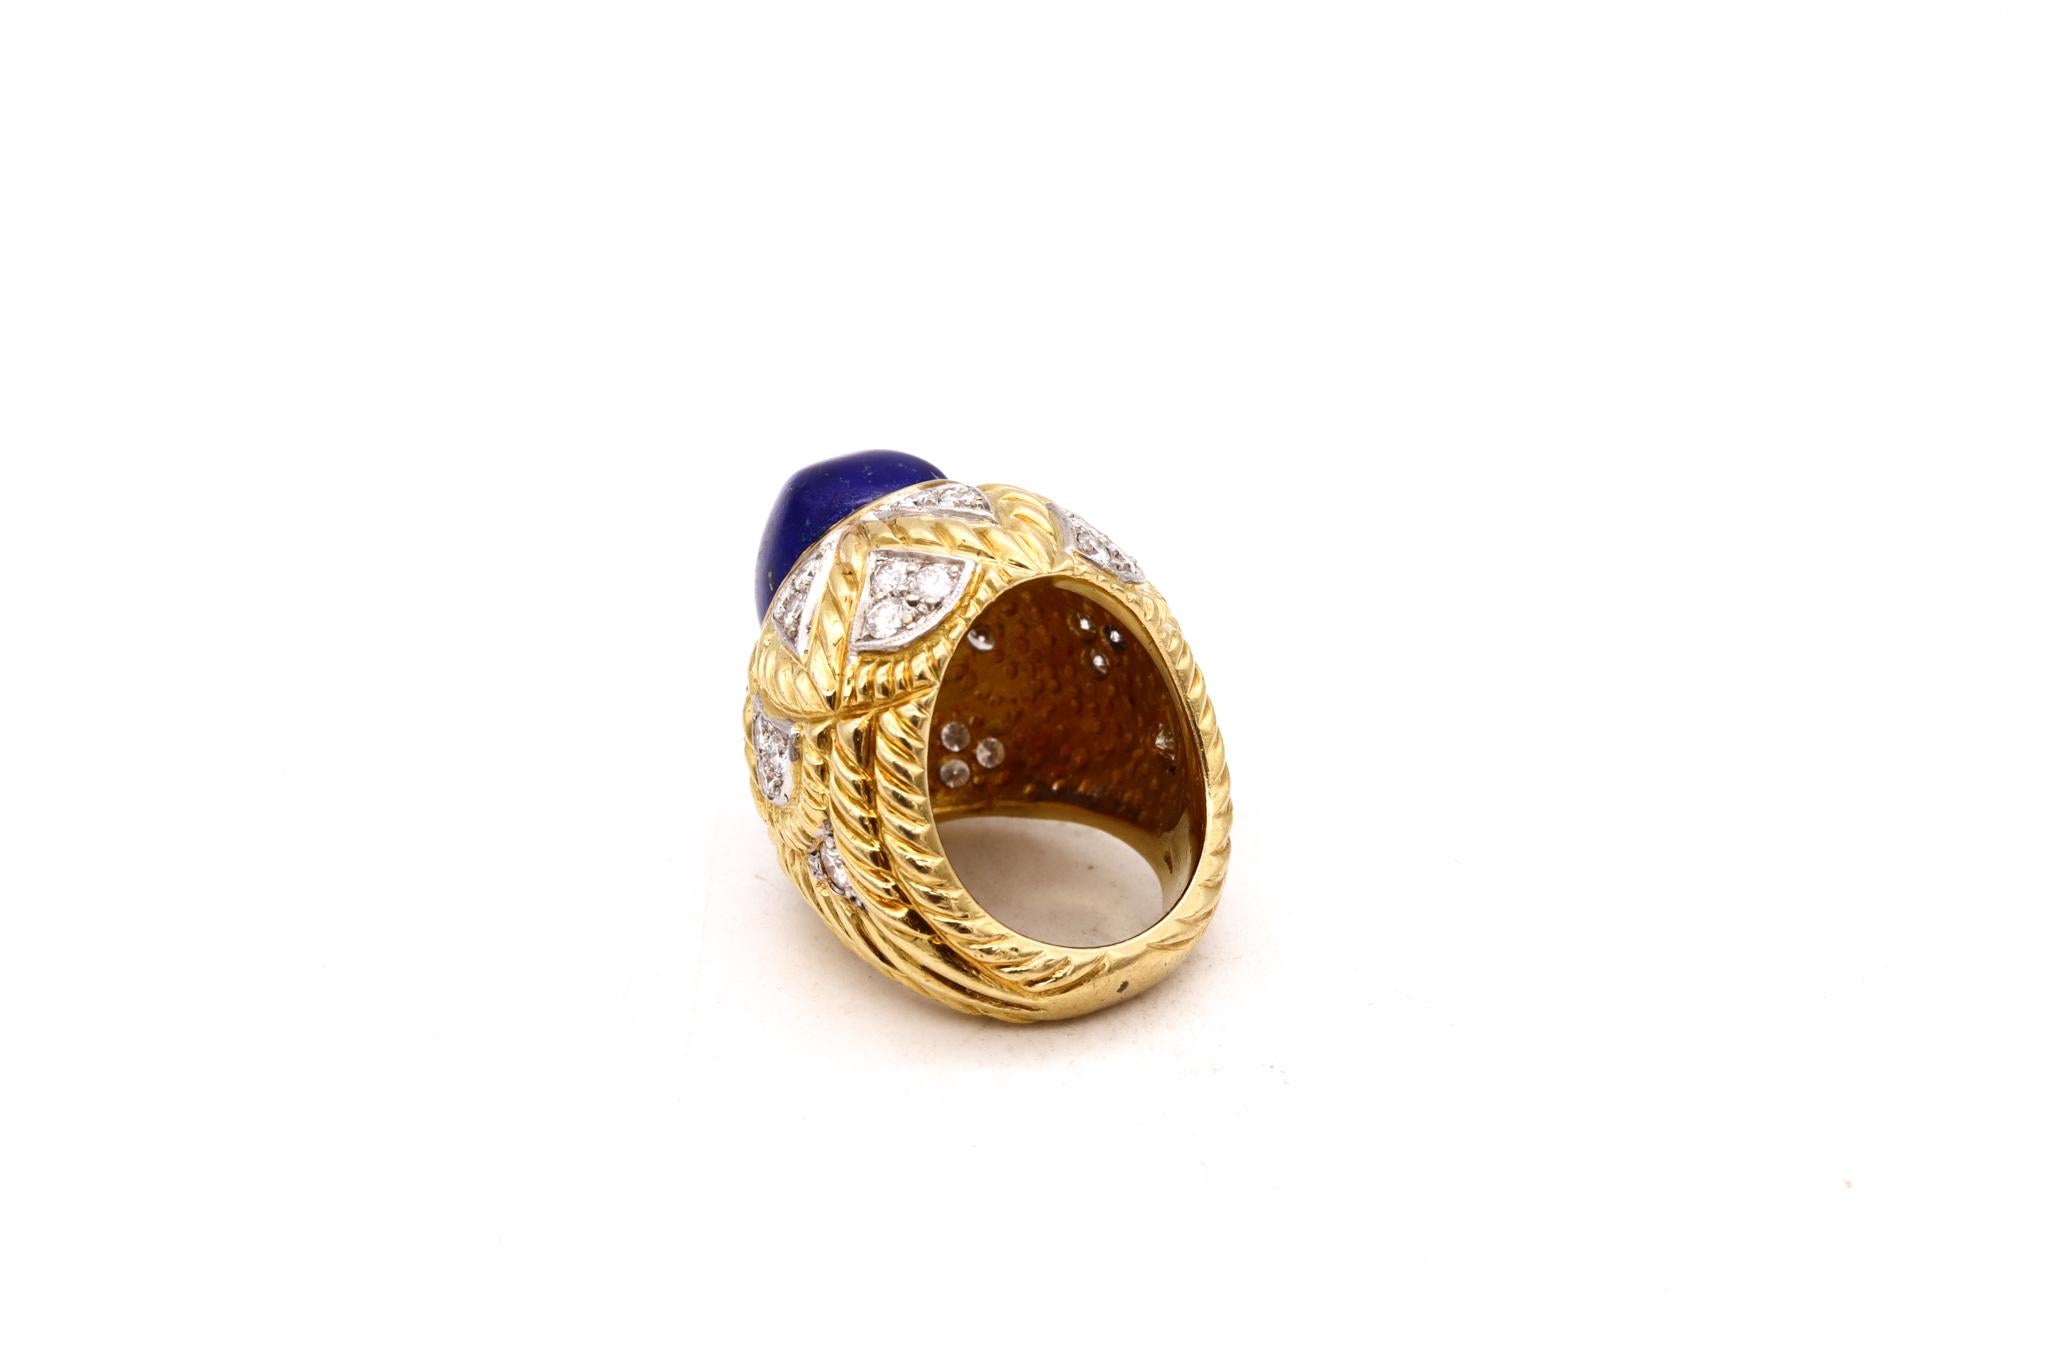 Modernist Farrad Italy 1960 Cocktail Ring In 18Kt With 19.53 Cts In Diamonds Lapis Lazuli For Sale